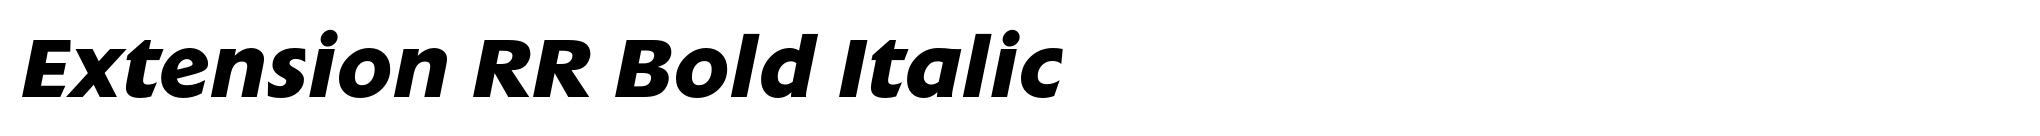 Extension RR Bold Italic image